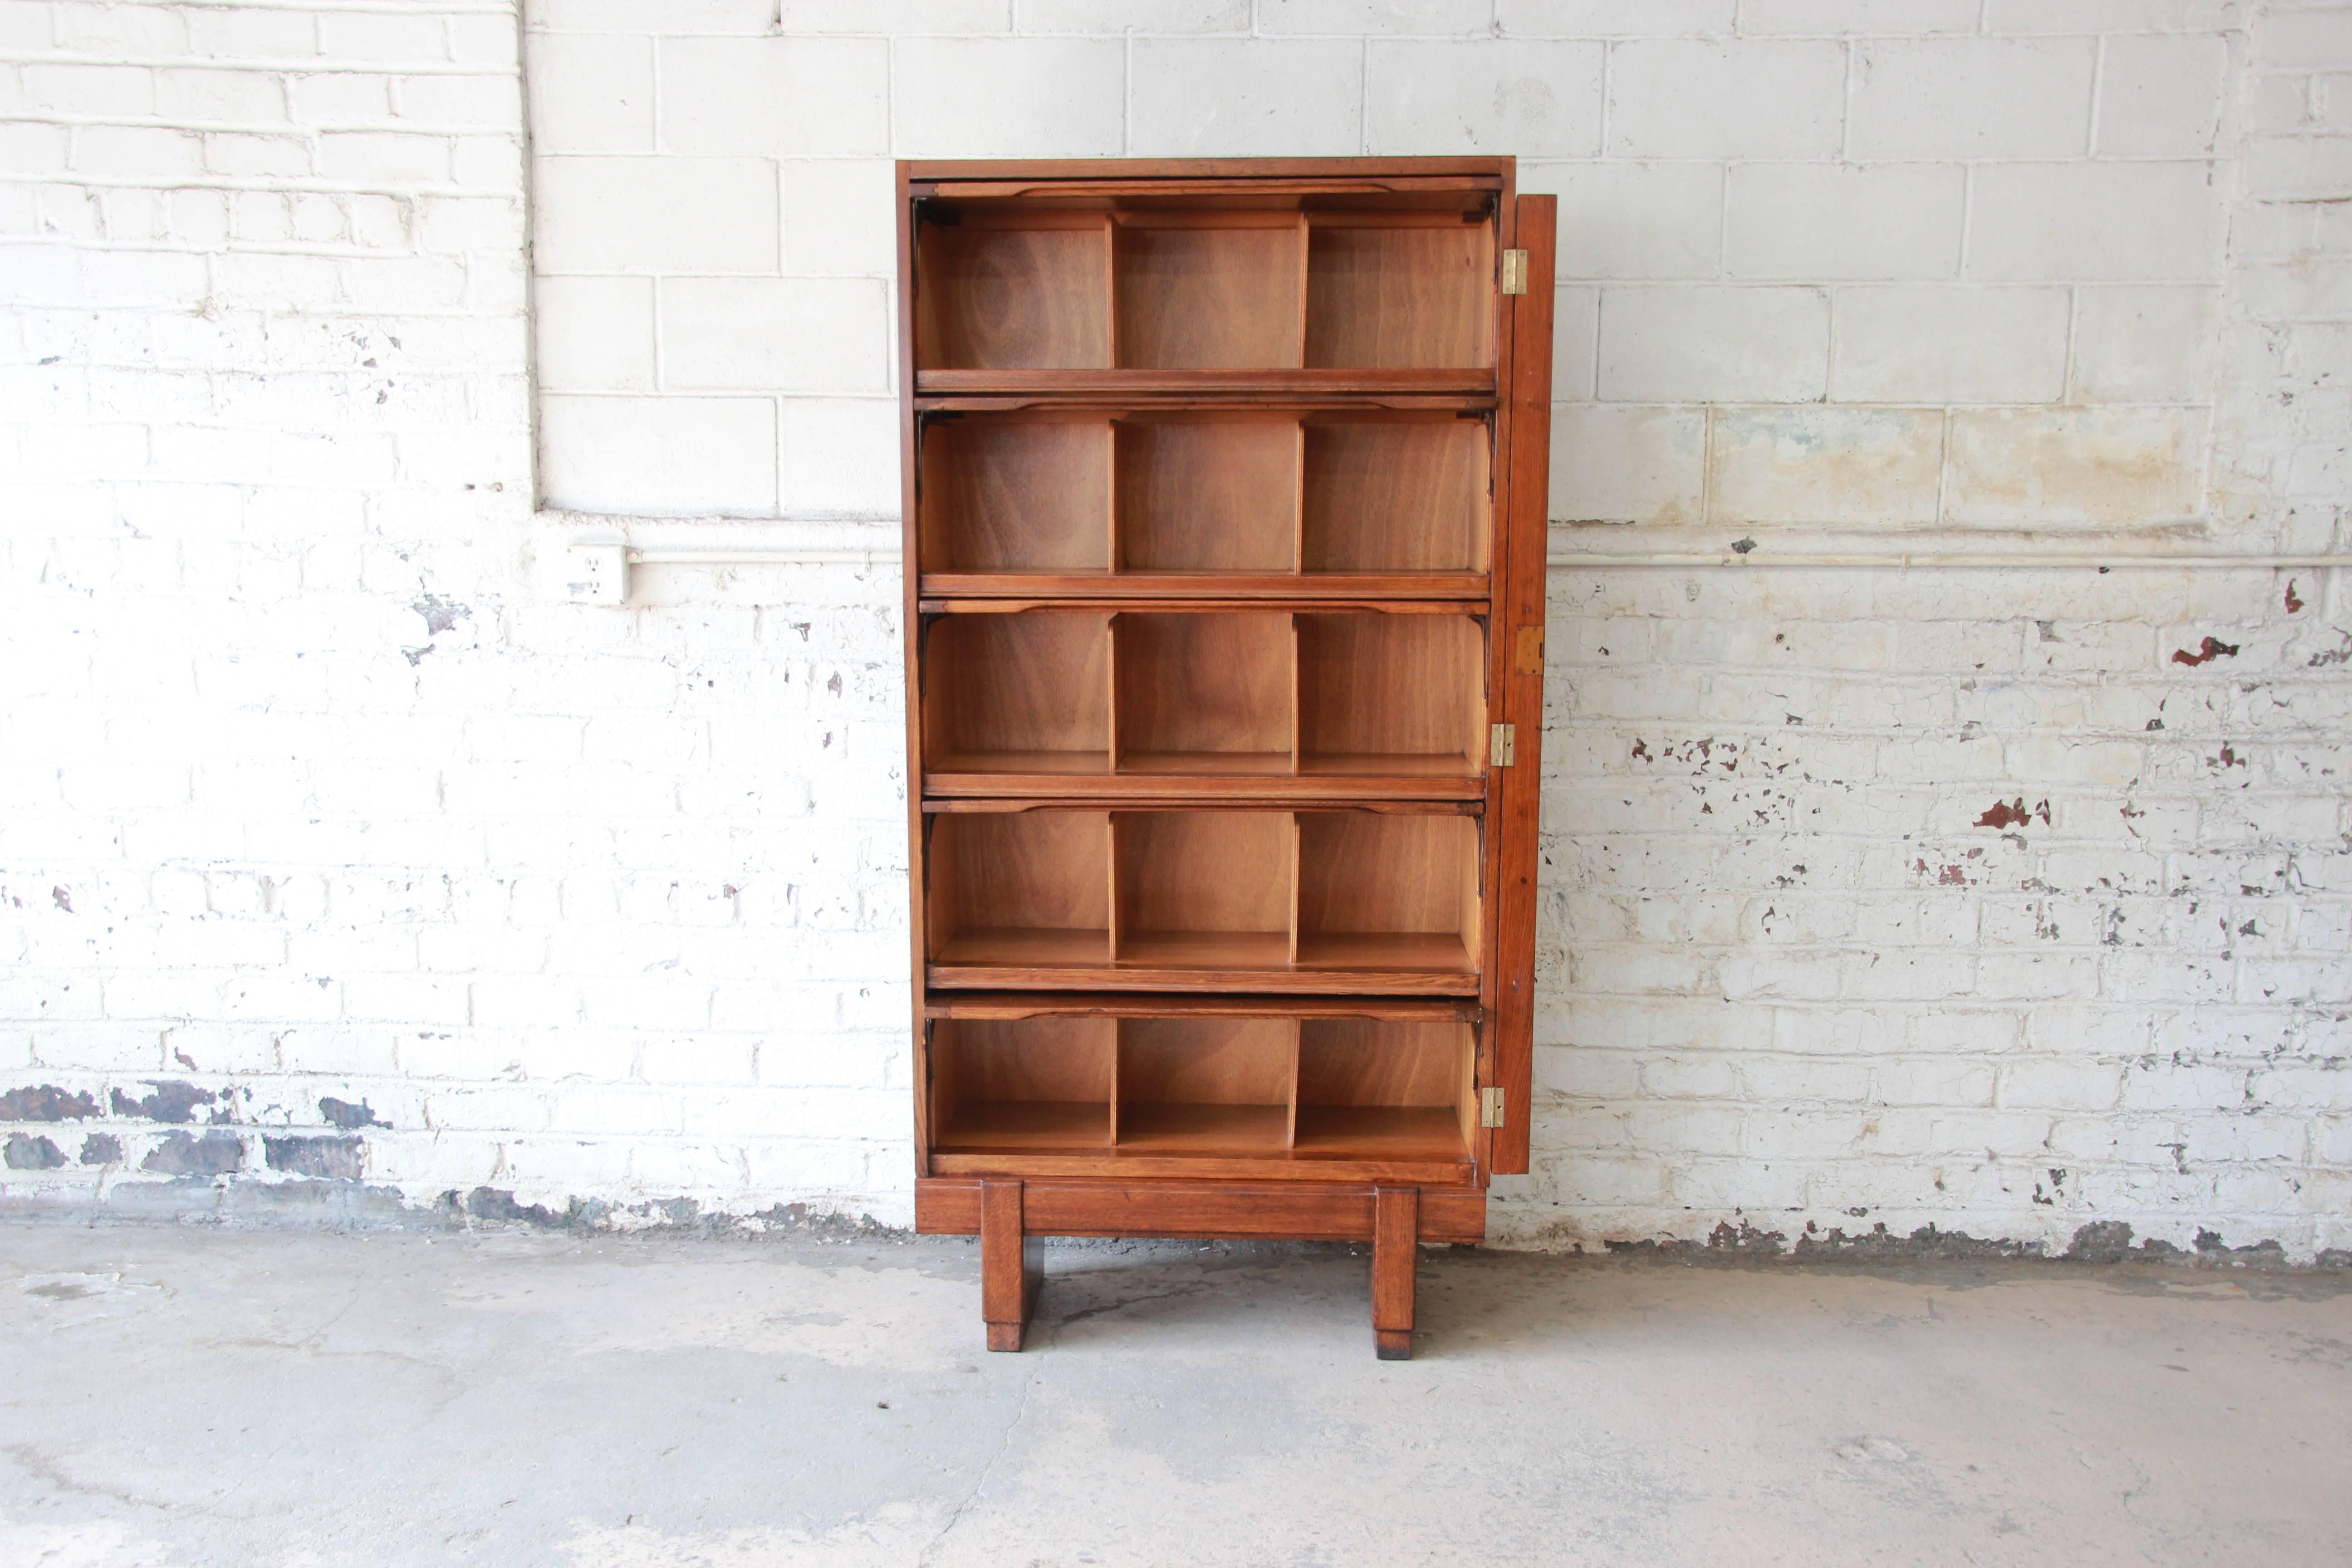 A very unique midcentury oak barrister bookcase. The bookcase features gorgeous oak wood grain and exposed dovetail joints. It offers ample room for storage, with five shelves, each with dividers. There is a unique locking mechanism that adds